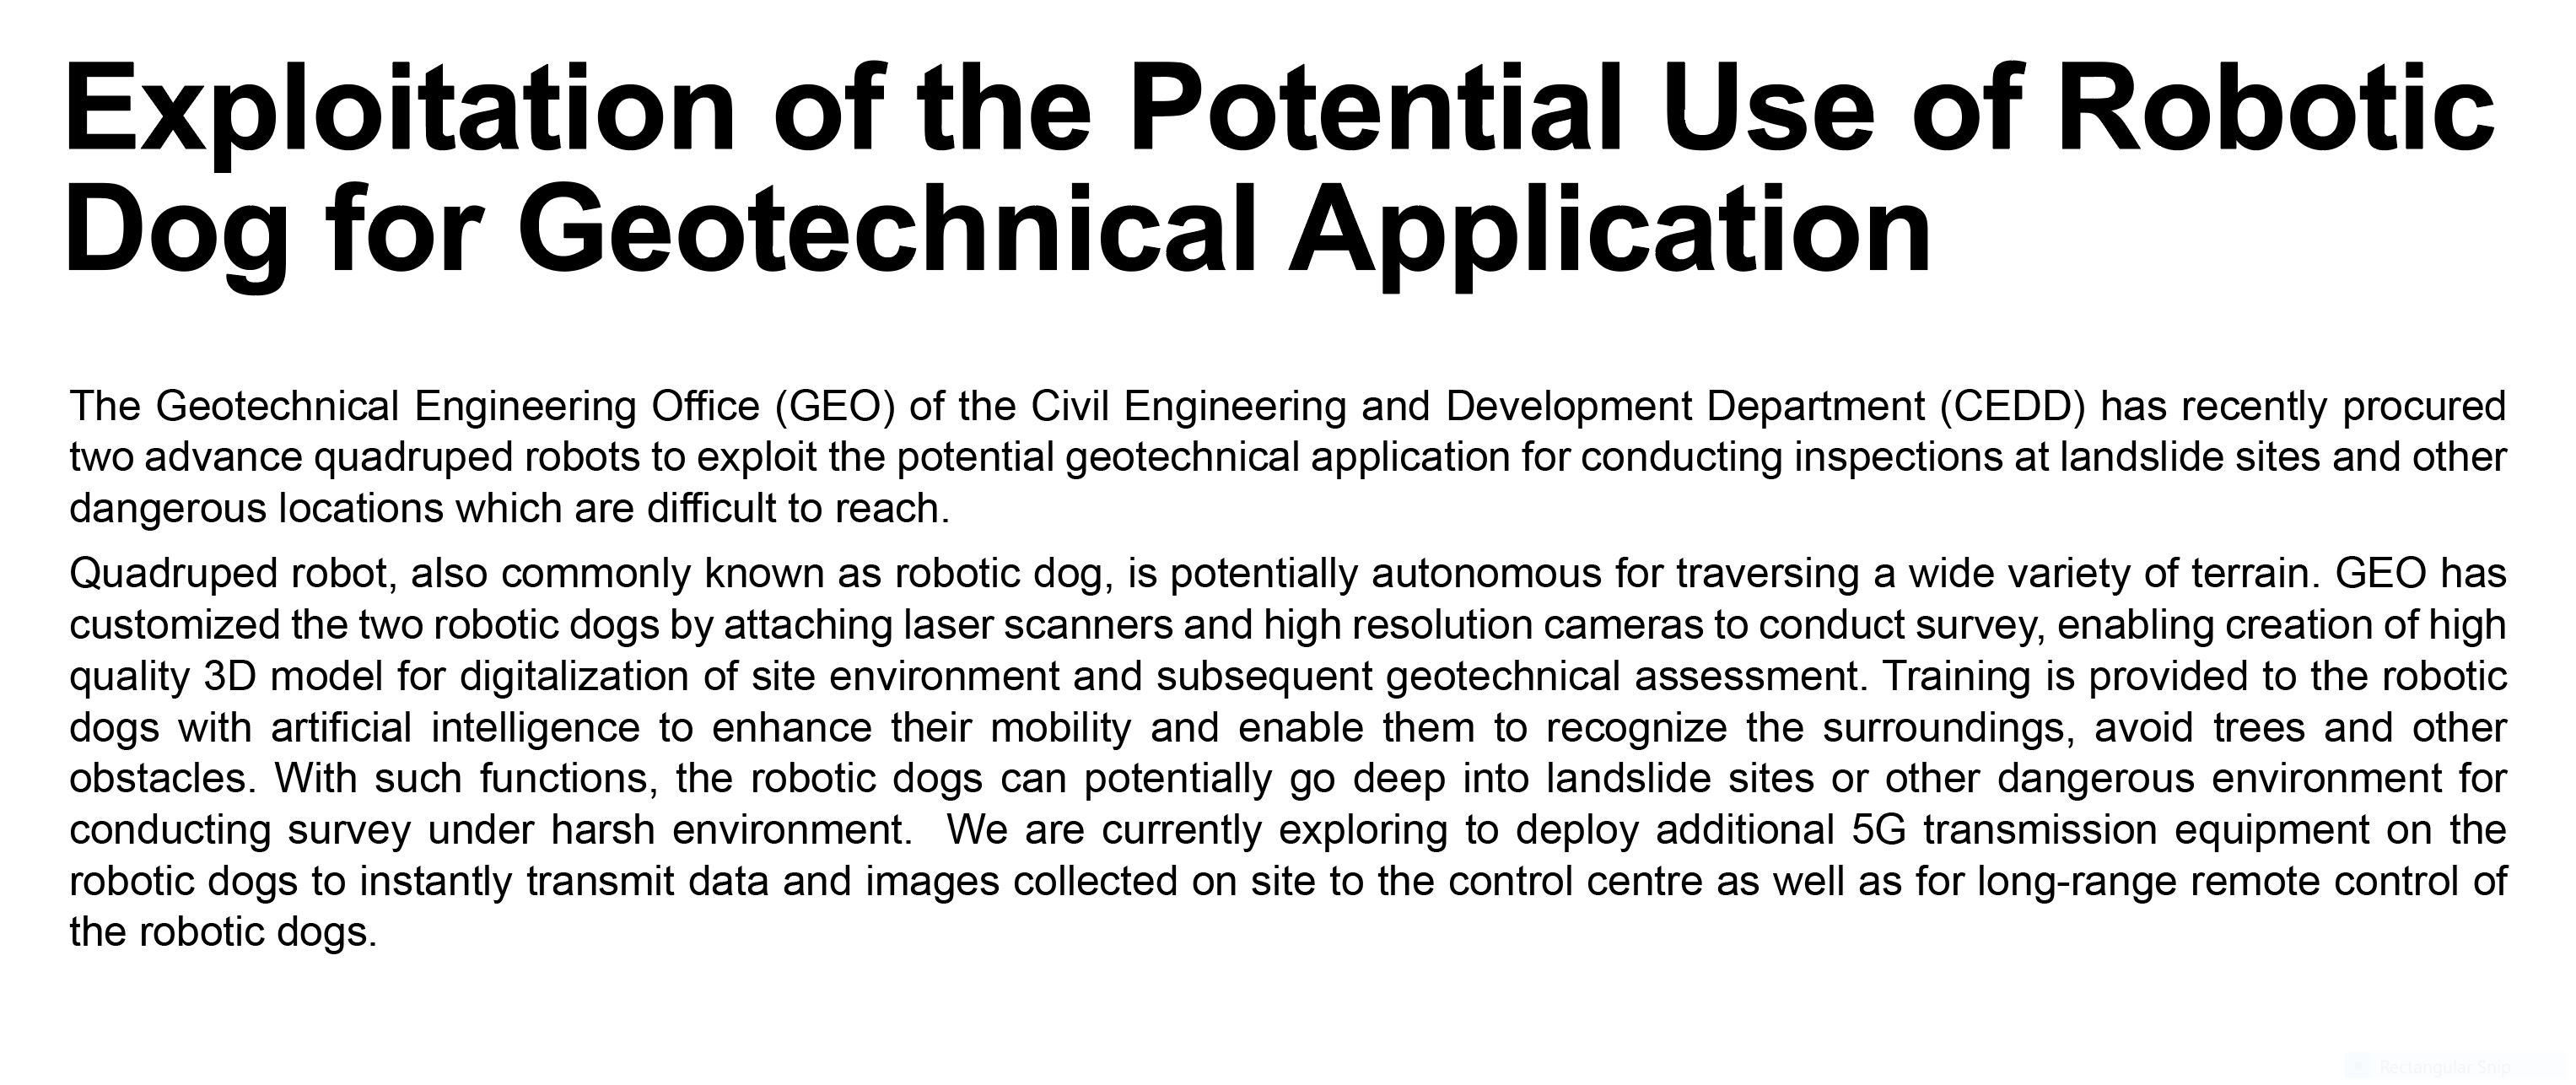 Exploitation of the Potential Use of Robotic Dog for Geotechnical Application,
							The Geotechnical Engineering Office (GEO) of the Civil Engineering and Development Department (CEDD) has recently procured two advance quadruped robots to exploit the potential geotechnical application for conducting inspections at landslide sites and other dangerous locations which are difficult to reach. Quadruped robot, also commonly known as robotic dog, is potentially autonomous for traversing a wide variety of terrain.  GEO has customized the two robotic dogs by attaching laser scanners and high resolution cameras to conduct survey, enabling creation of high quality 3D model for digitalization of site environment and subsequent geotechnical assessment.  Training is provided to the robotic dogs with artificial intelligence to enhance their mobility and enable them to recognize the surroundings, avoid trees and other obstacles.  With such functions, the robotic dogs can potentially go deep into landslide sites or other dangerous environment for conducting survey under harsh environment.  We are currently exploring to deploy additional 5G transmission equipment on the robotic dogs to instantly transmit data and images collected on site to the control centre as well as for long-range remote control of the robotic dogs. 